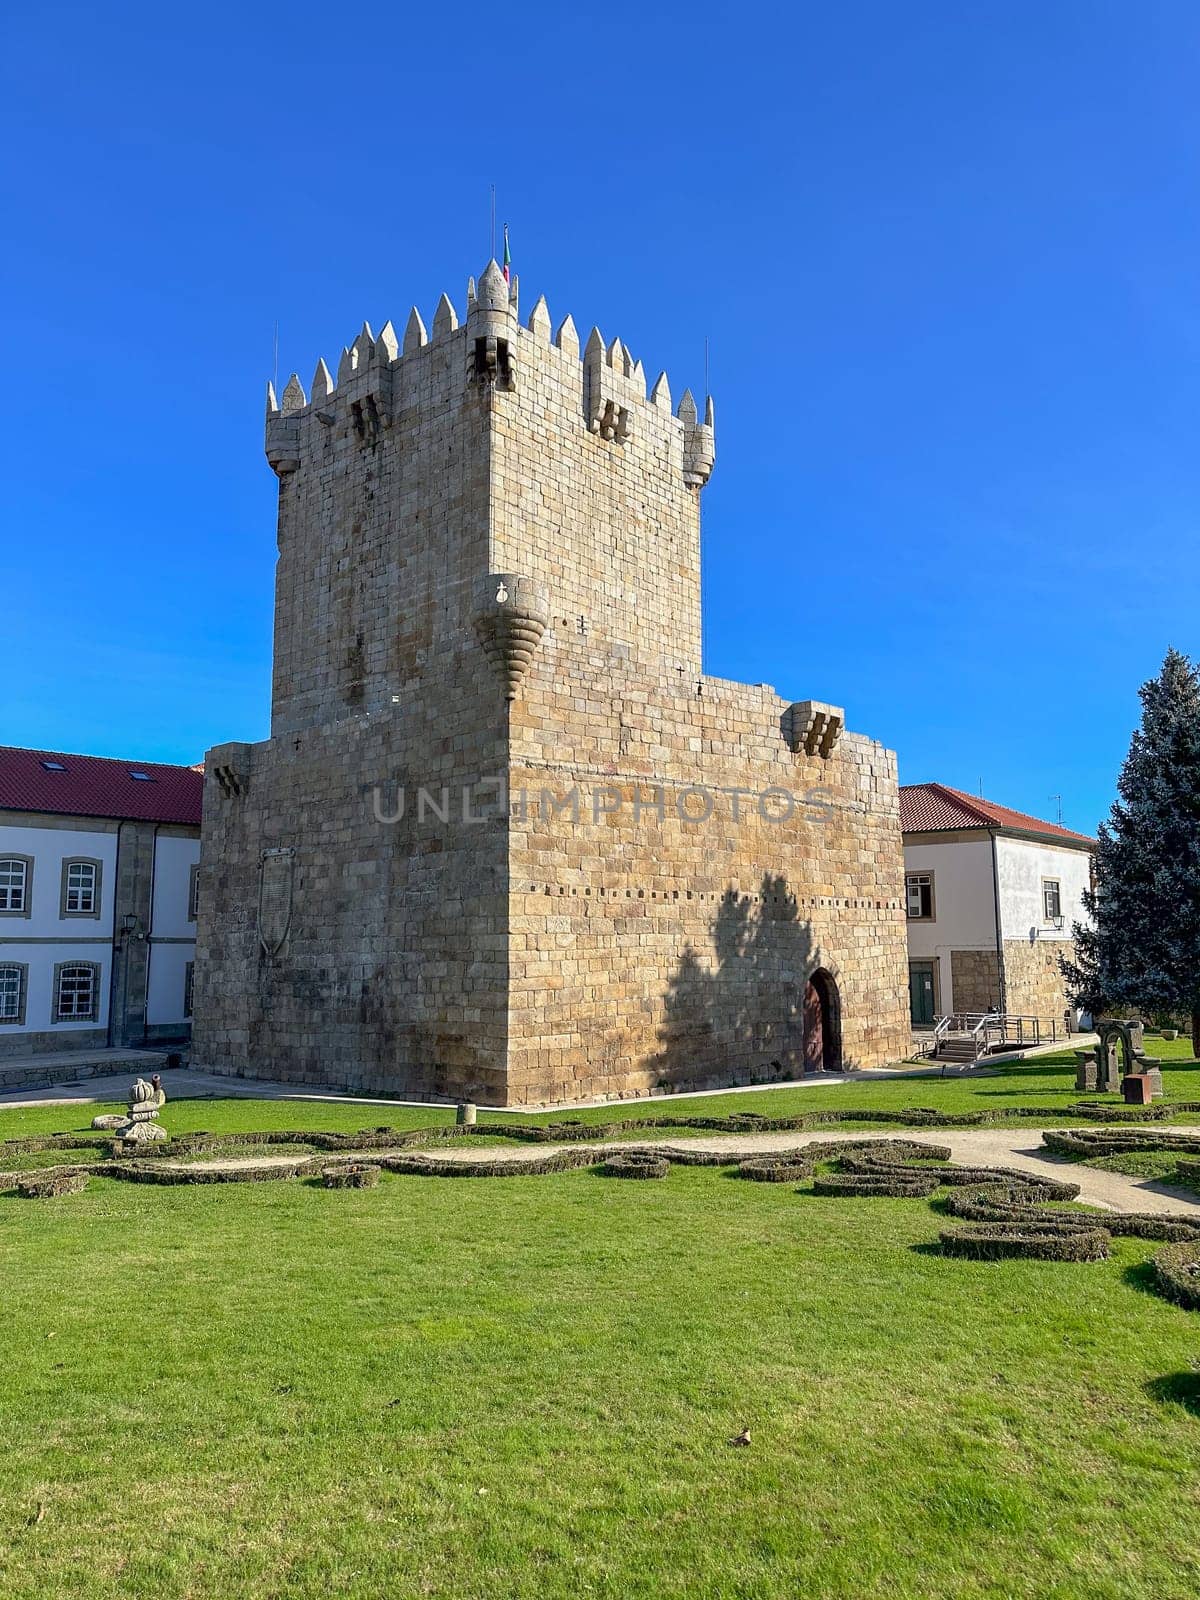 Castle in the old town of Portuguese town Chaves. Sunny day with clear sky.